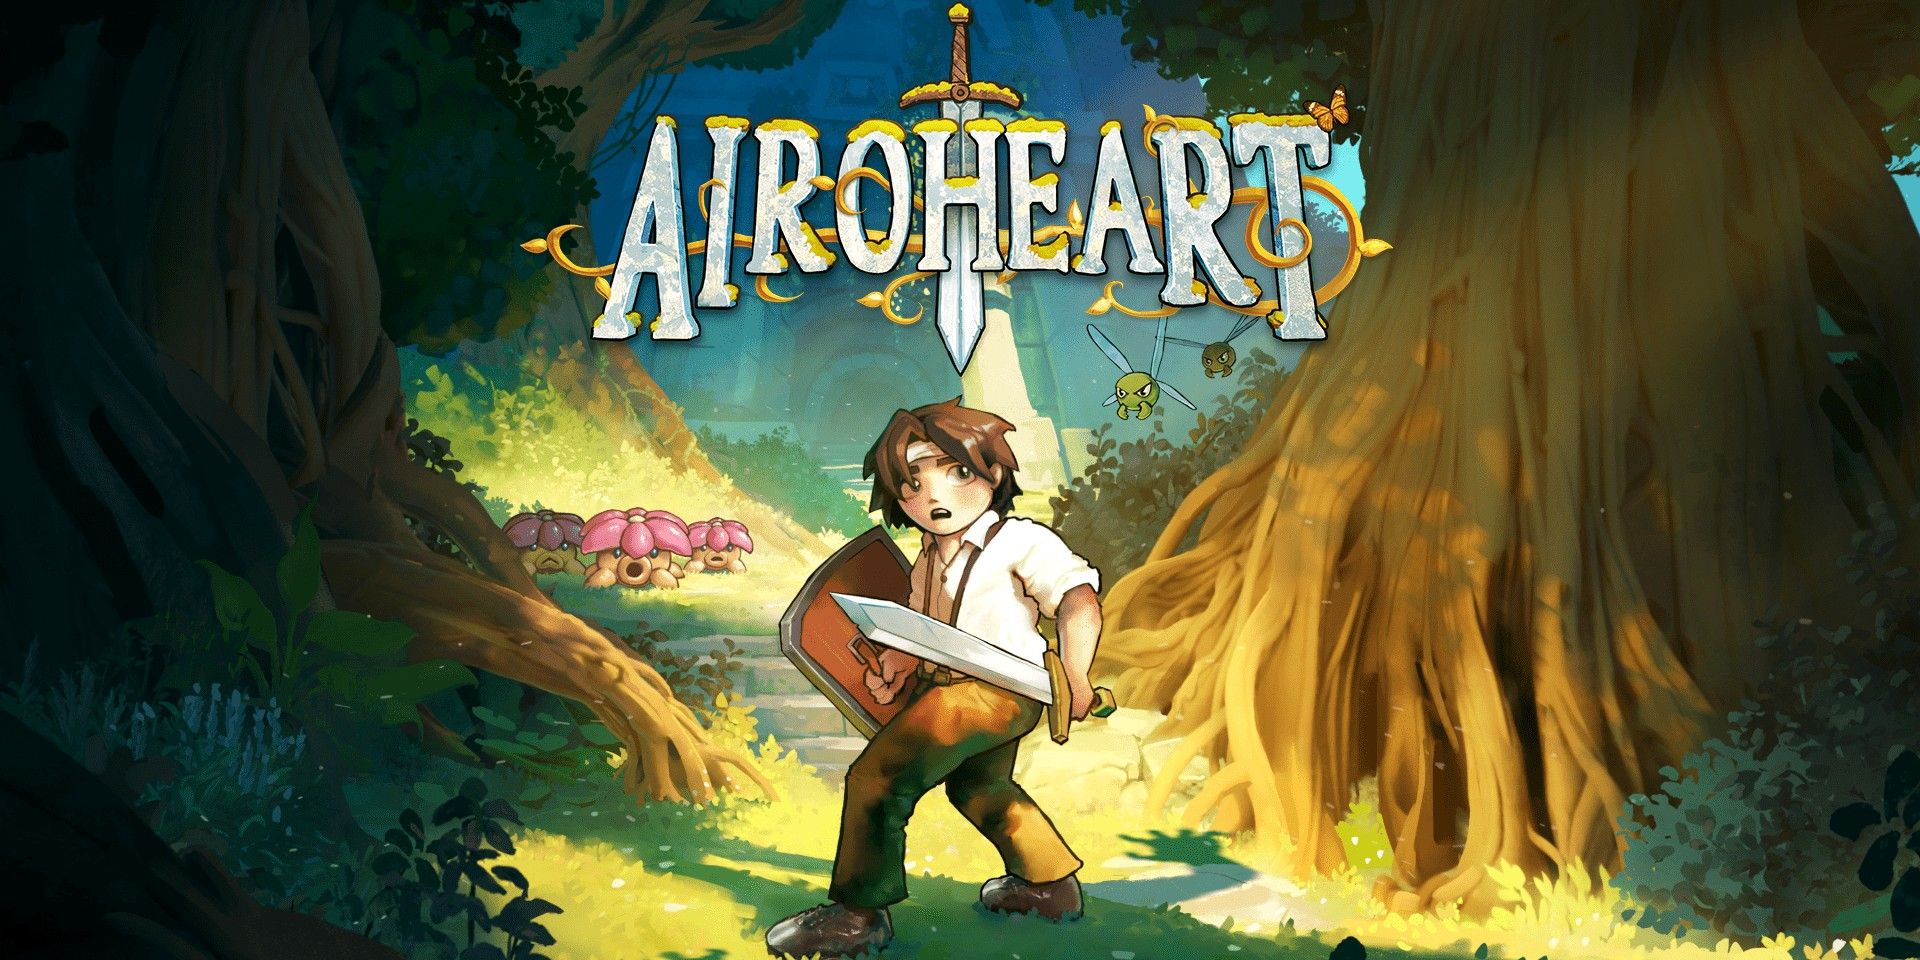 Promotional image for the upcoming action RPG Airoheart.